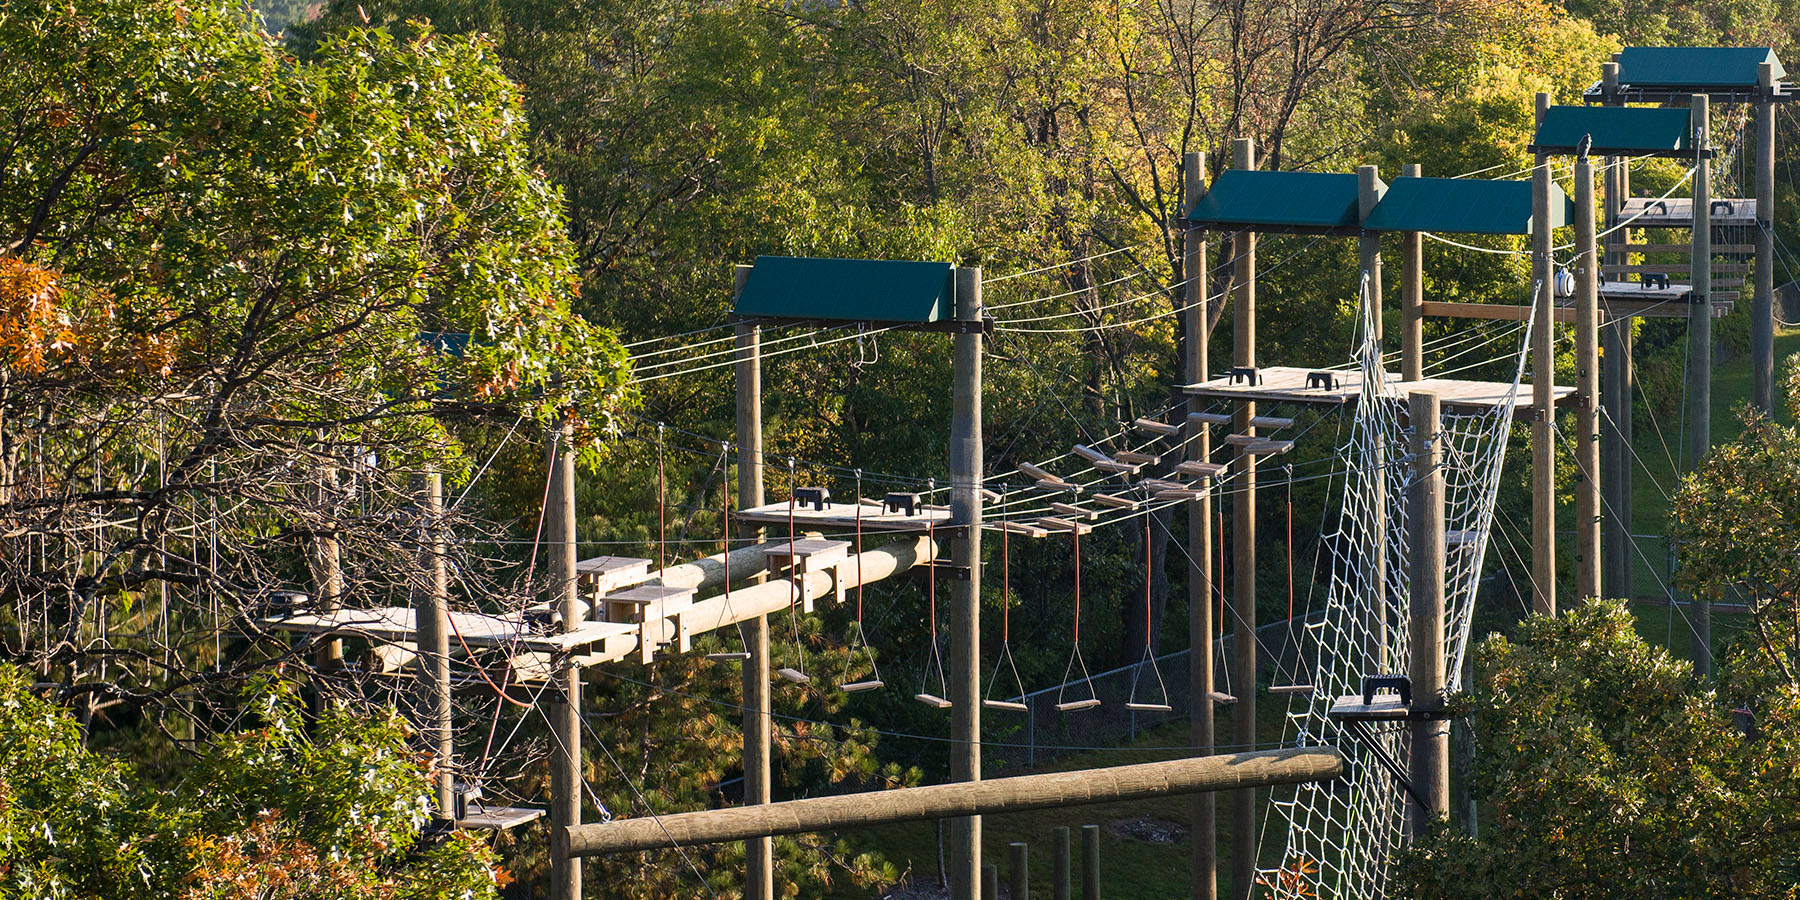 Canopy challenge course designed and built by ABEE Inc.